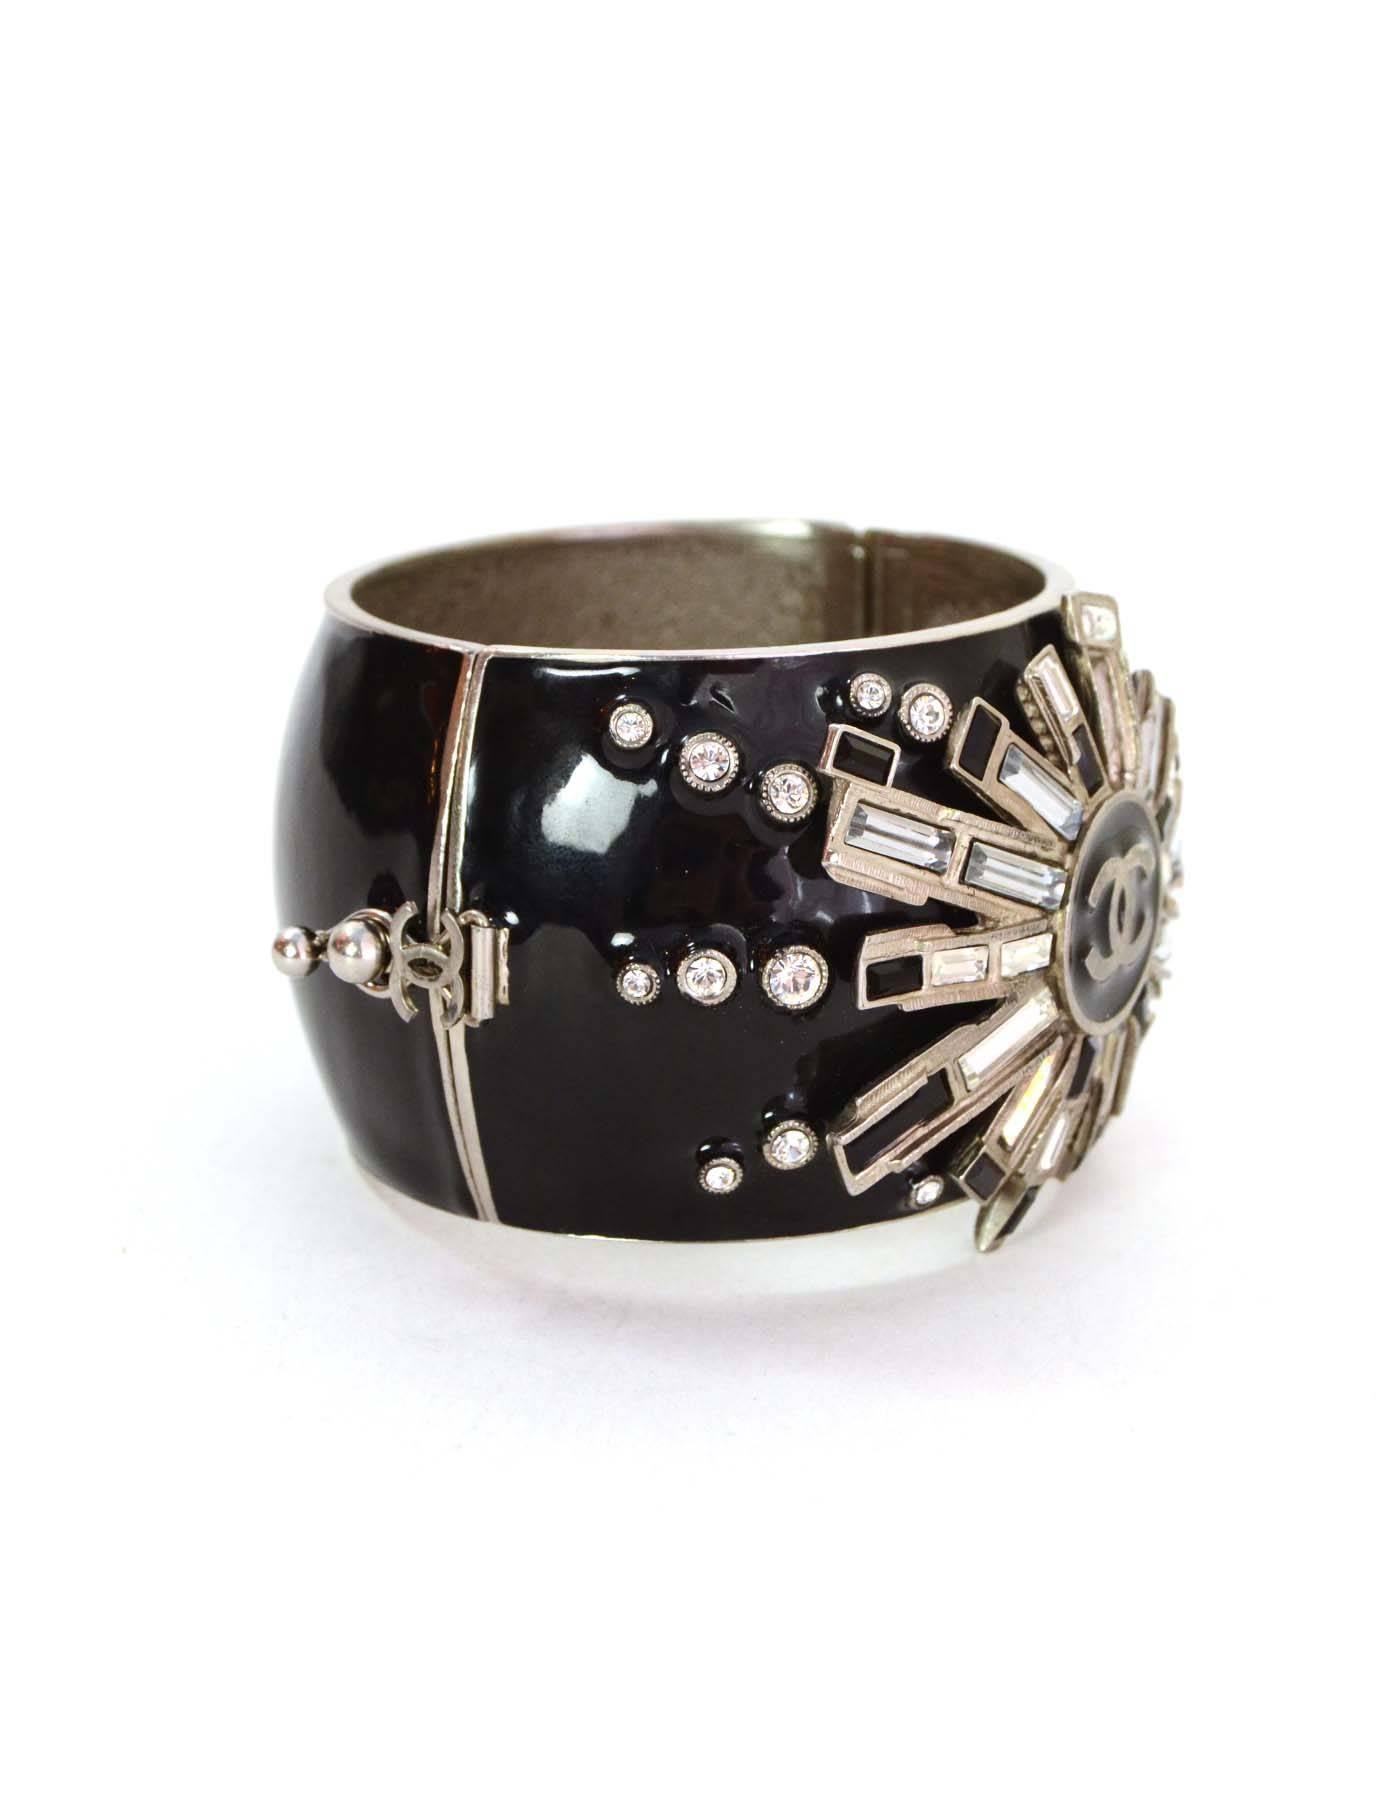 Chanel Black & Crystal Starburst Cuff 
Features large CC in center
Made In: France
Year of Production: 2005
Color: Black, silvertone and clear
Materials: Metal, enamel, and crystal
Closure: Magnetic hinge closure with metal lever to secure